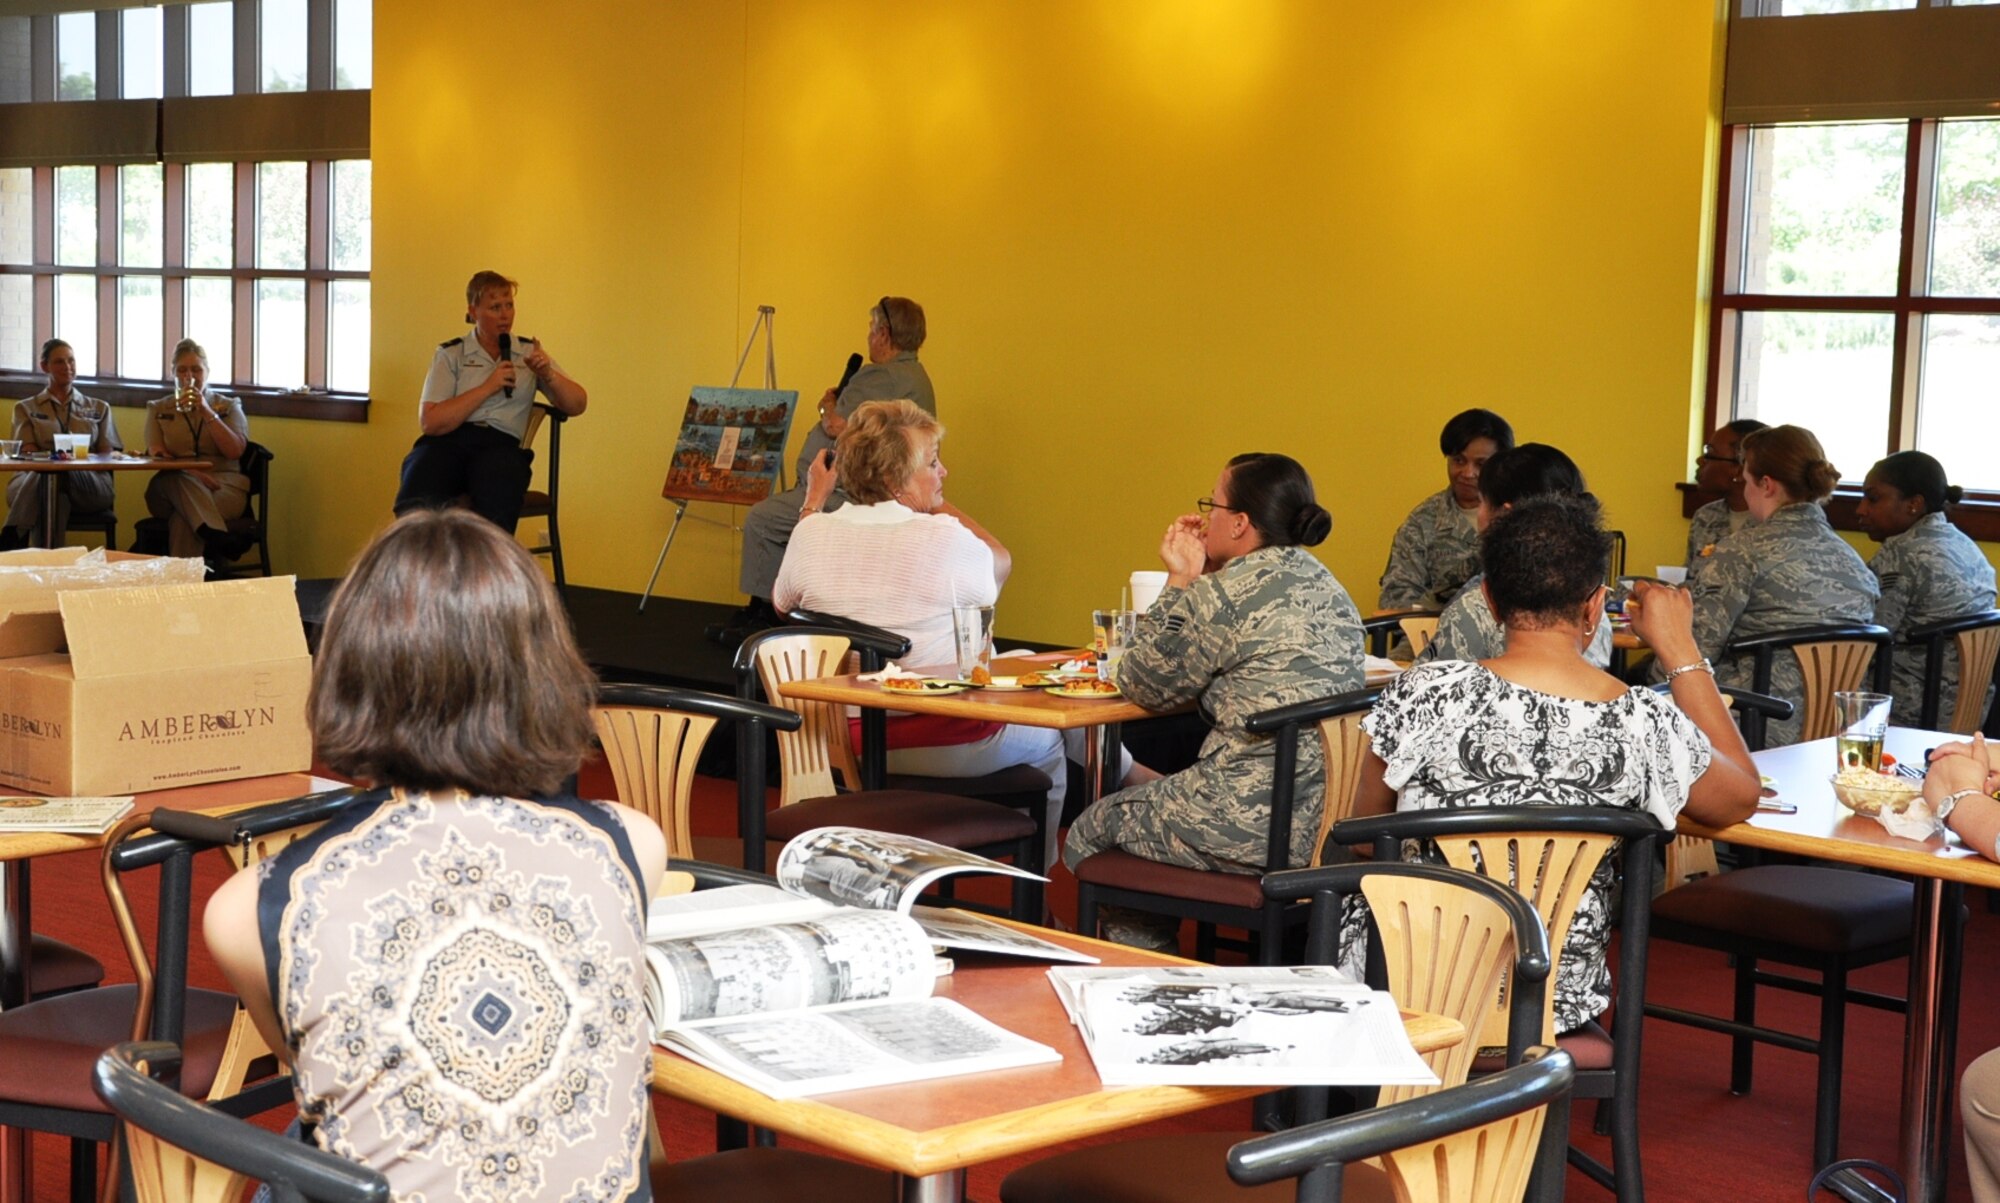 Women attending the Women’s Empowerment Group gathering listen as Col. DeAnna Burt, 460th Operations Group commander, back left, asks questions provided by the audience to Marge Alexander, member of the Marine Corps Women’s Reserve during World War II, back right, June 26, 2013, at the Panther Den on Buckley Air Force Base, Colo. Alexander joined the Marine Corps the first year women were allowed in the branch of service to support the war effort. Women provided needed support at home stations to free up men to fight overseas. Alexander answered questions about her military service and her life following her time in the Marine Corps. (U.S. Air Force photo by Staff Sgt. Kali L. Gradishar/Released)